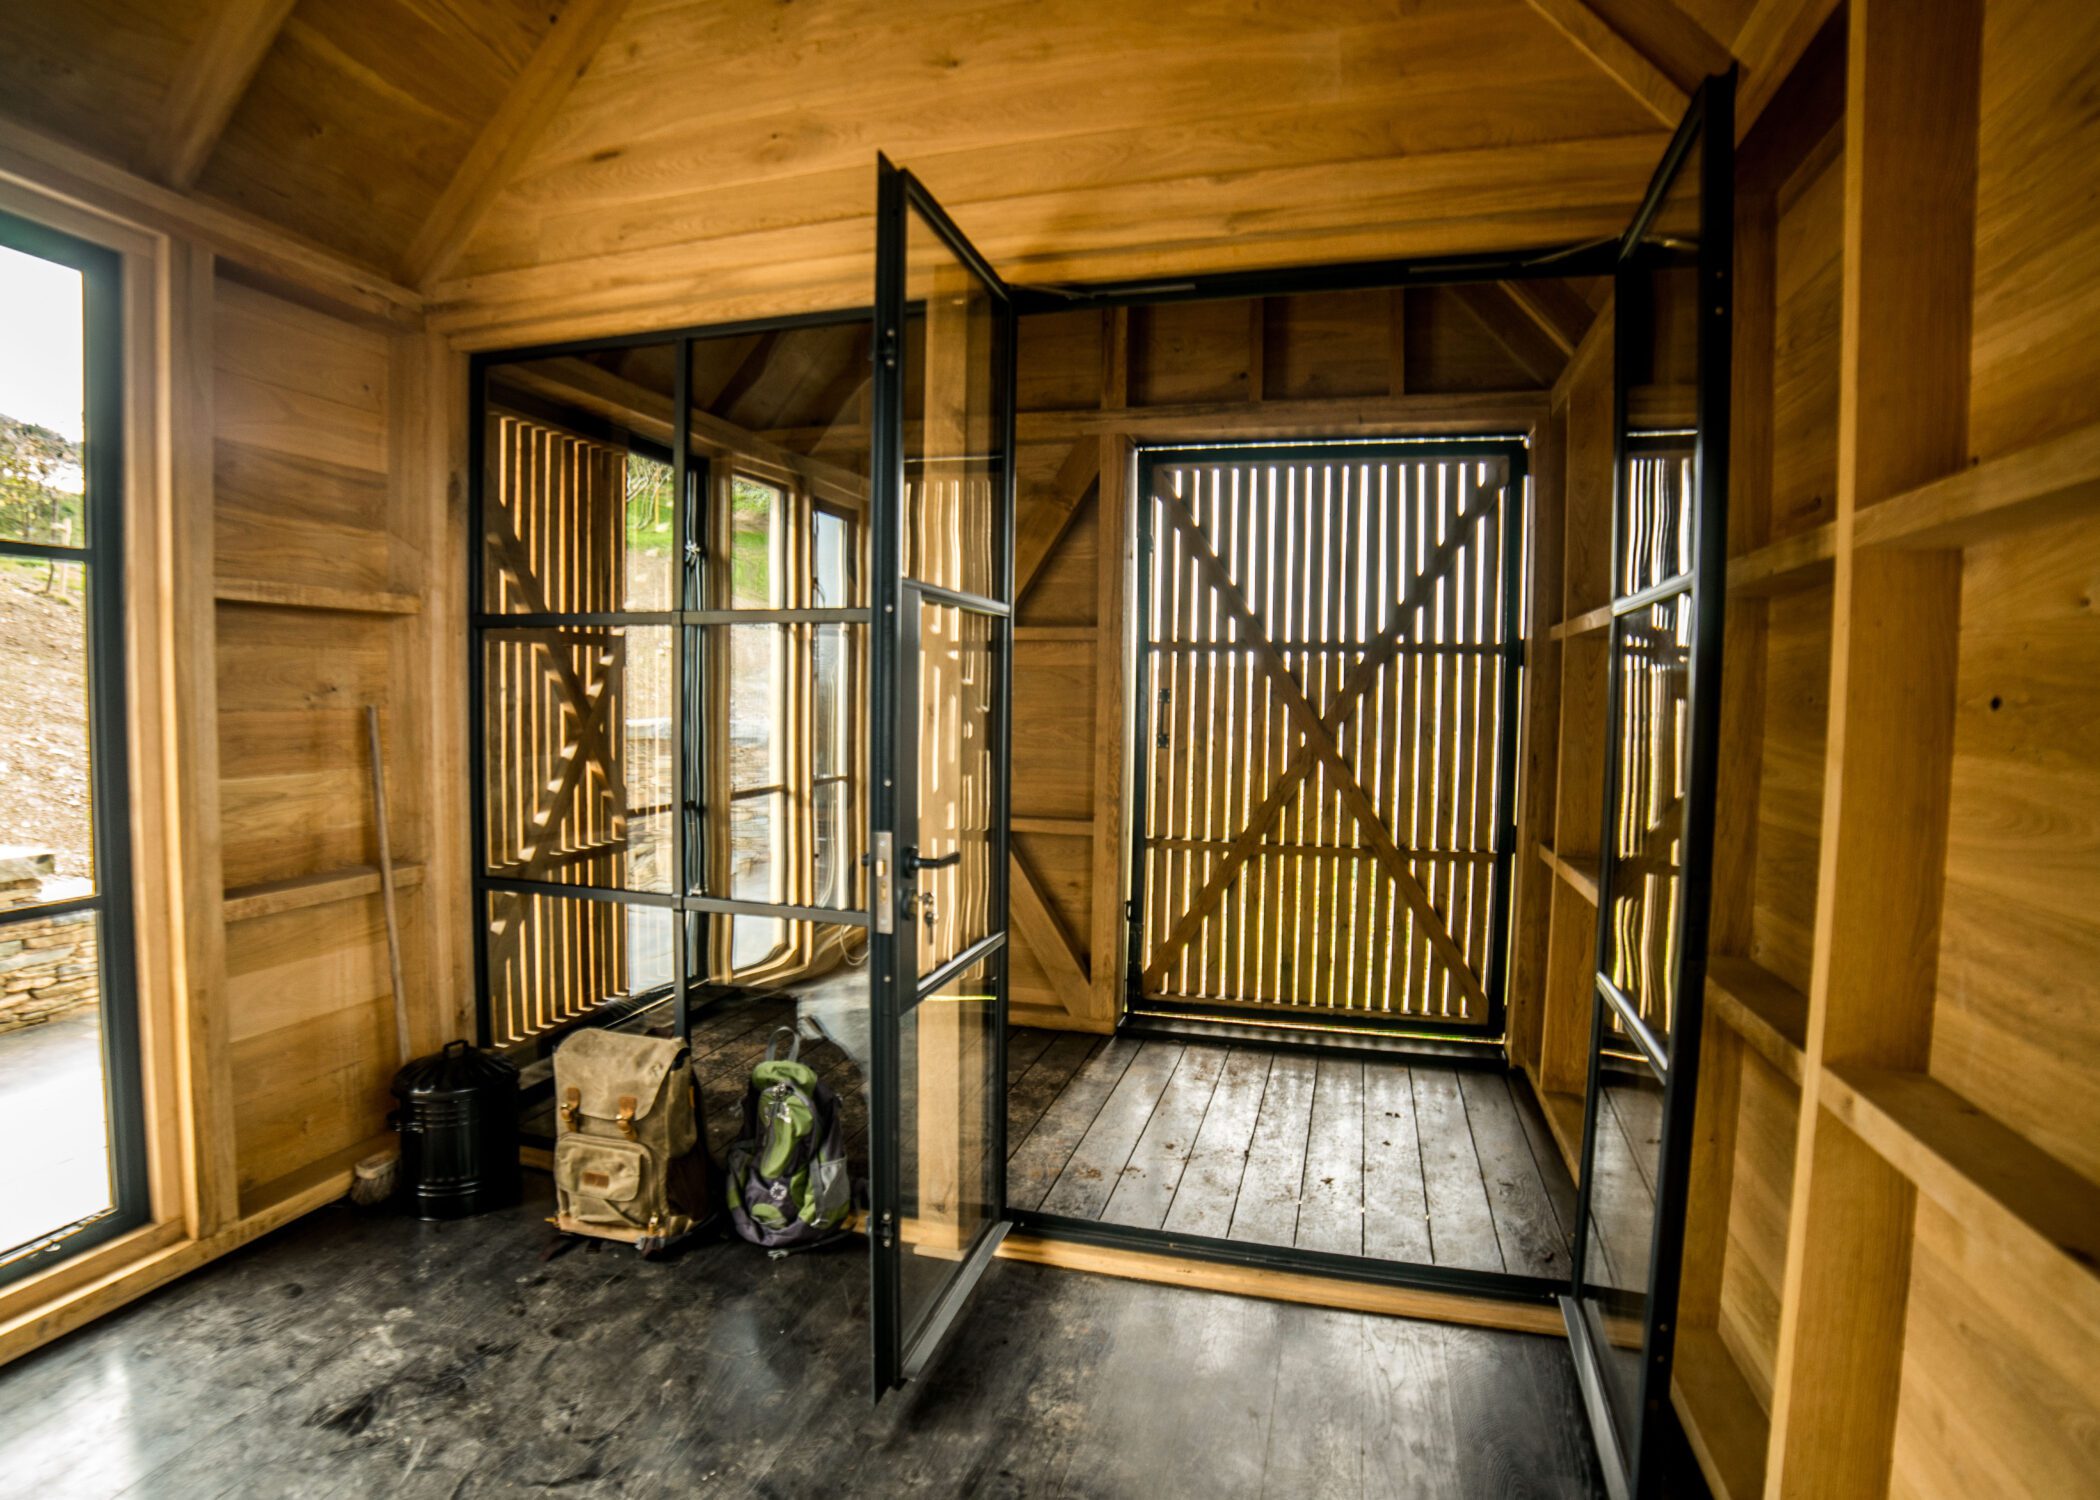 Sandblastered Oak interior and Crittall Glazing at Woodcutters Refuge | Life Space Cabins